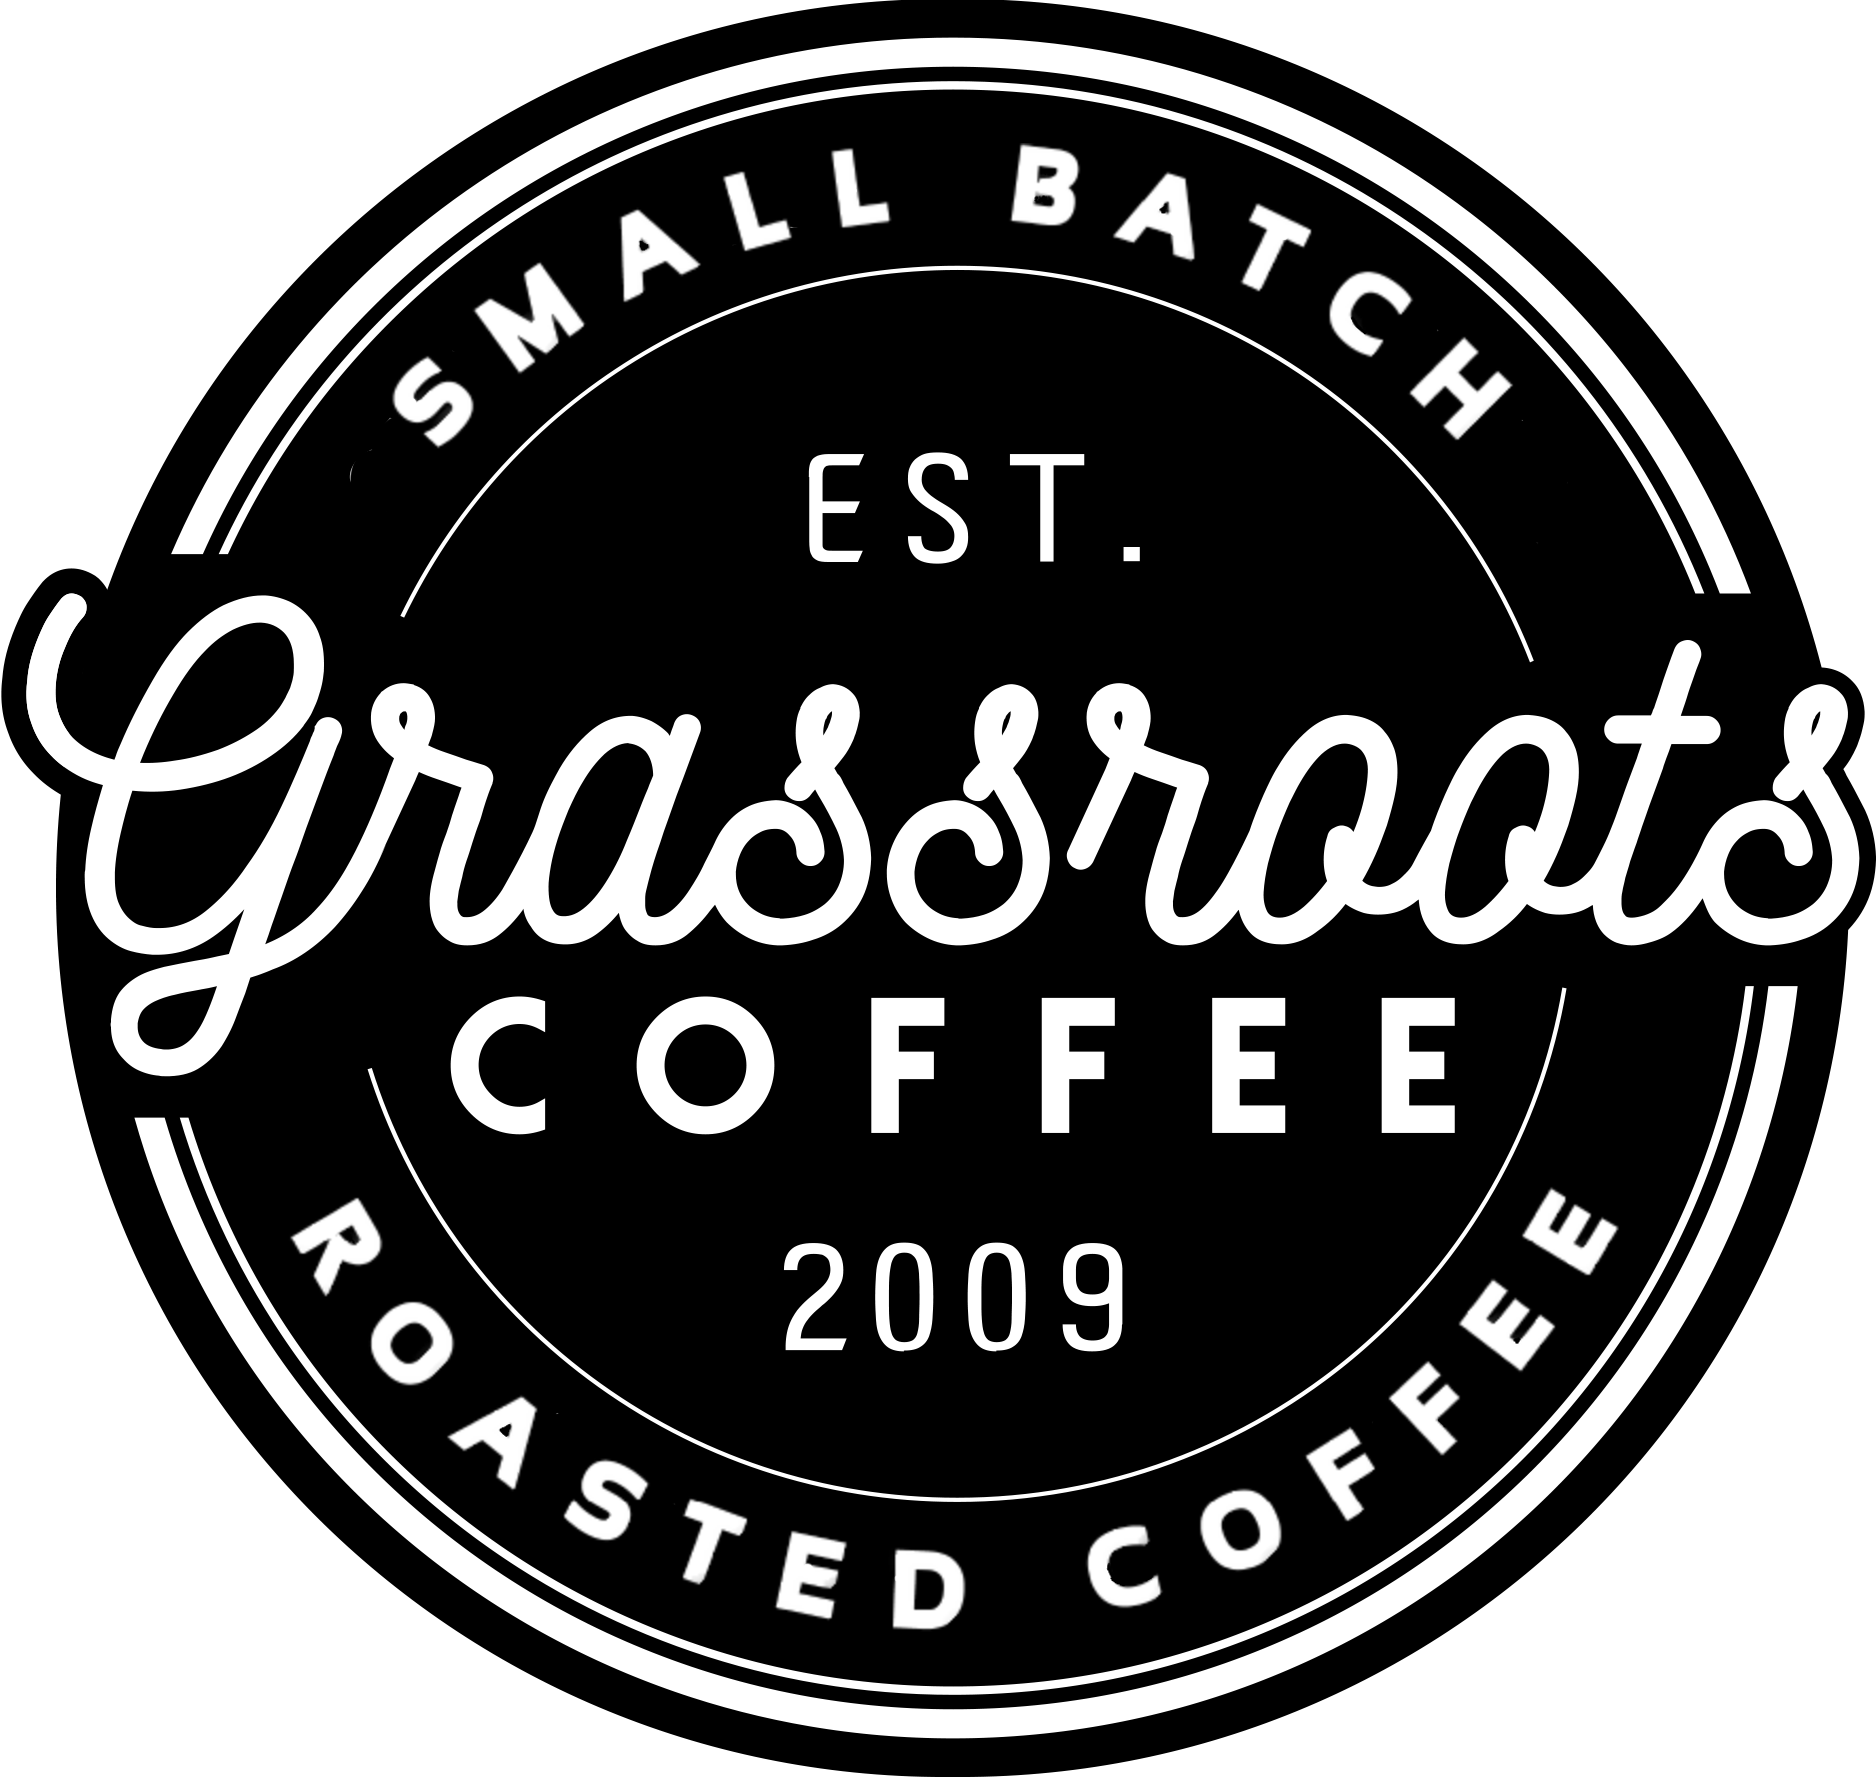 12oz Cold Clear Cups - Grassroots Coffee Roasters